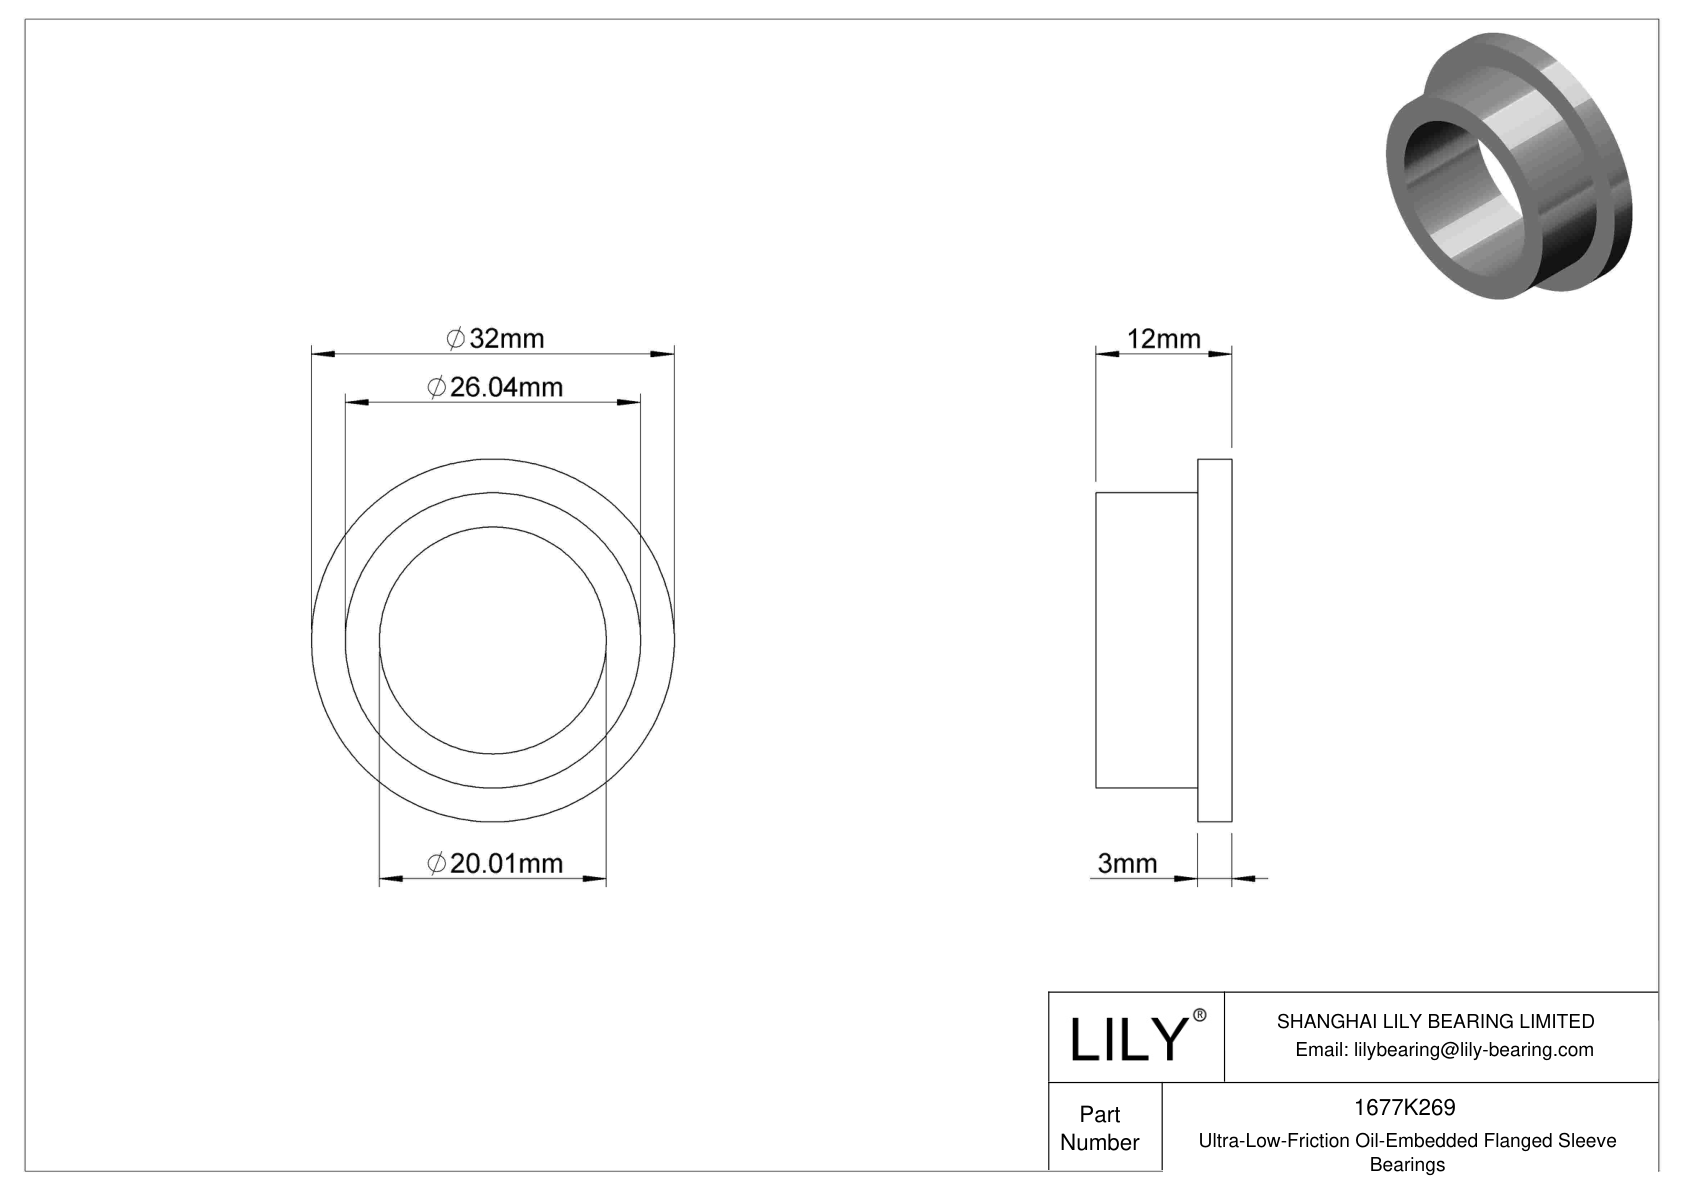 BGHHKCGJ Ultra-Low-Friction Oil-Embedded Flanged Sleeve Bearings cad drawing